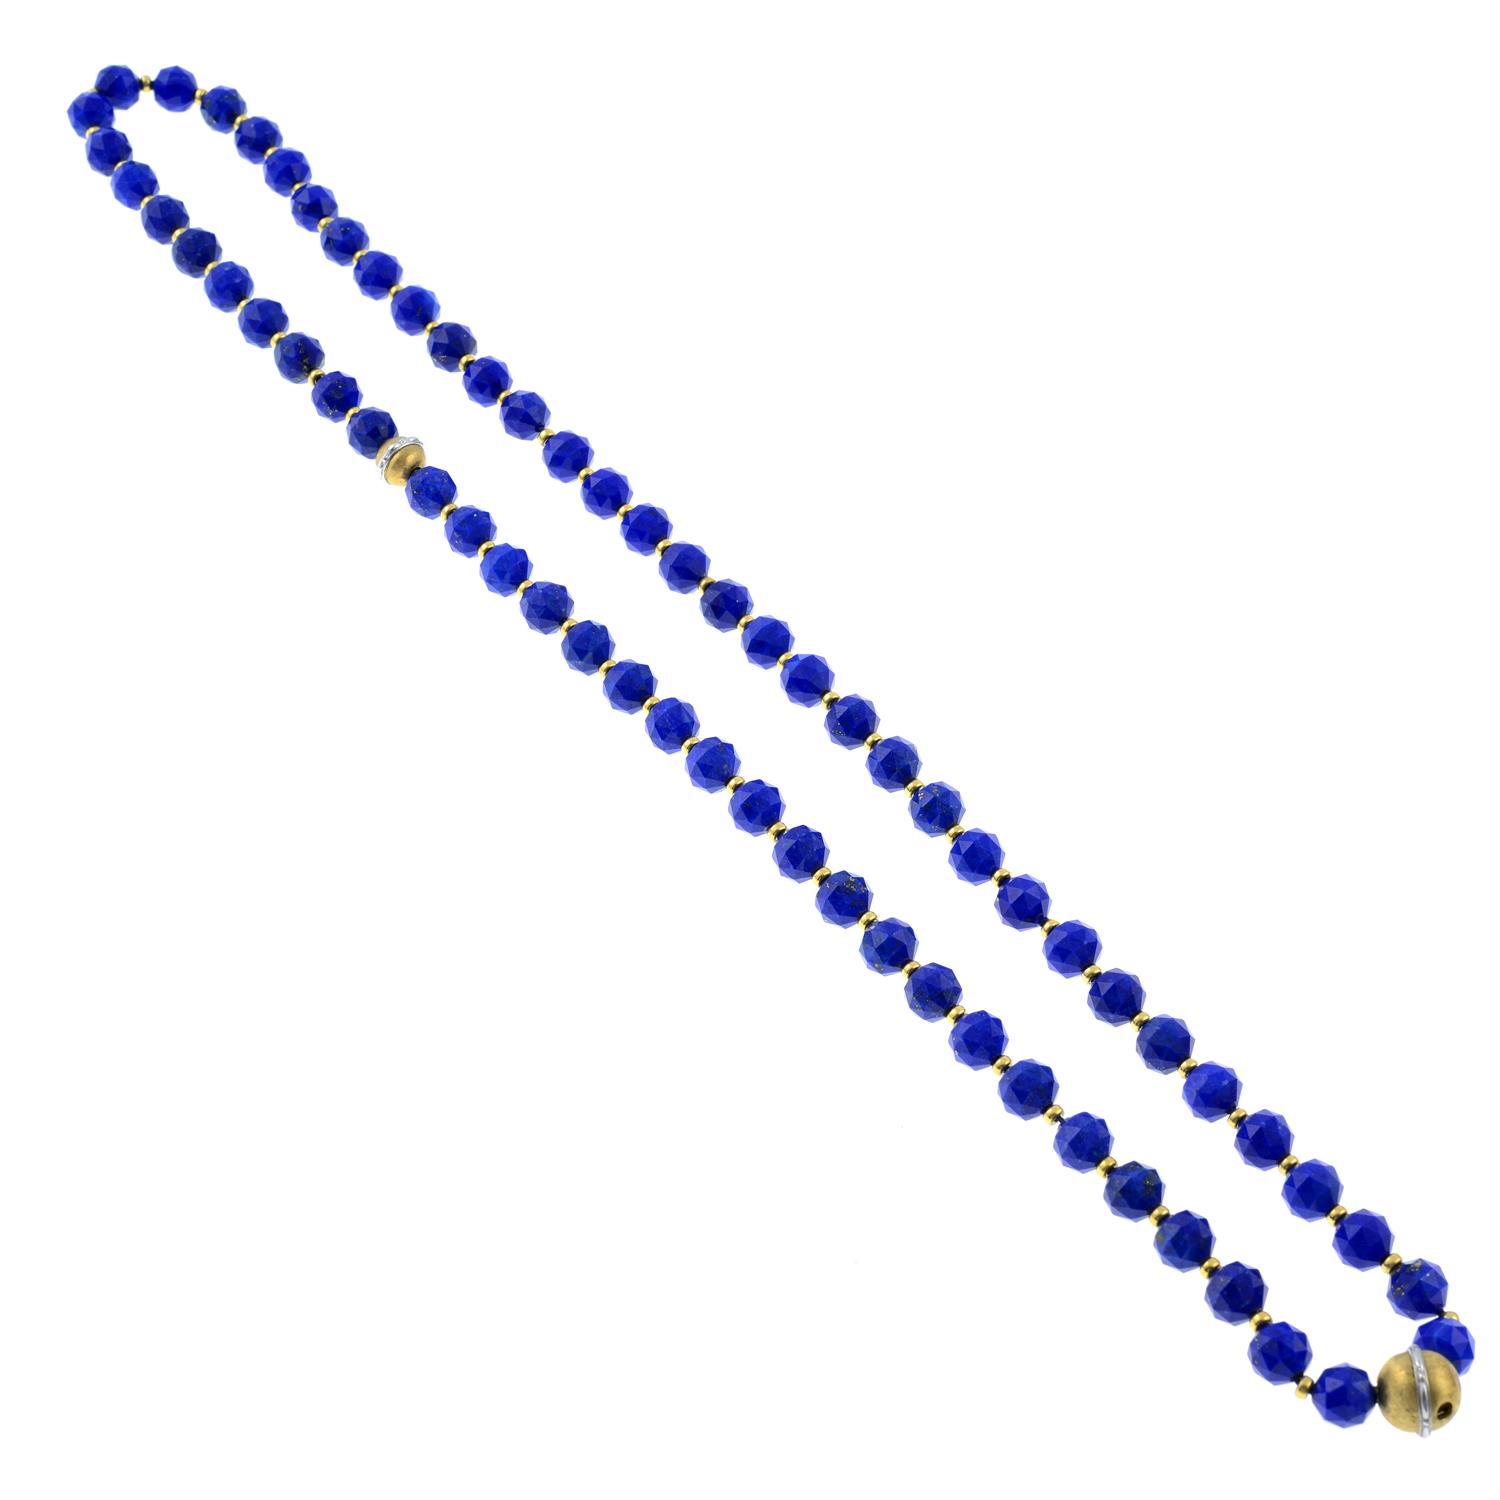 A lapis lazuli faceted bead, interchangeable necklace and bracelet set. - Image 2 of 2